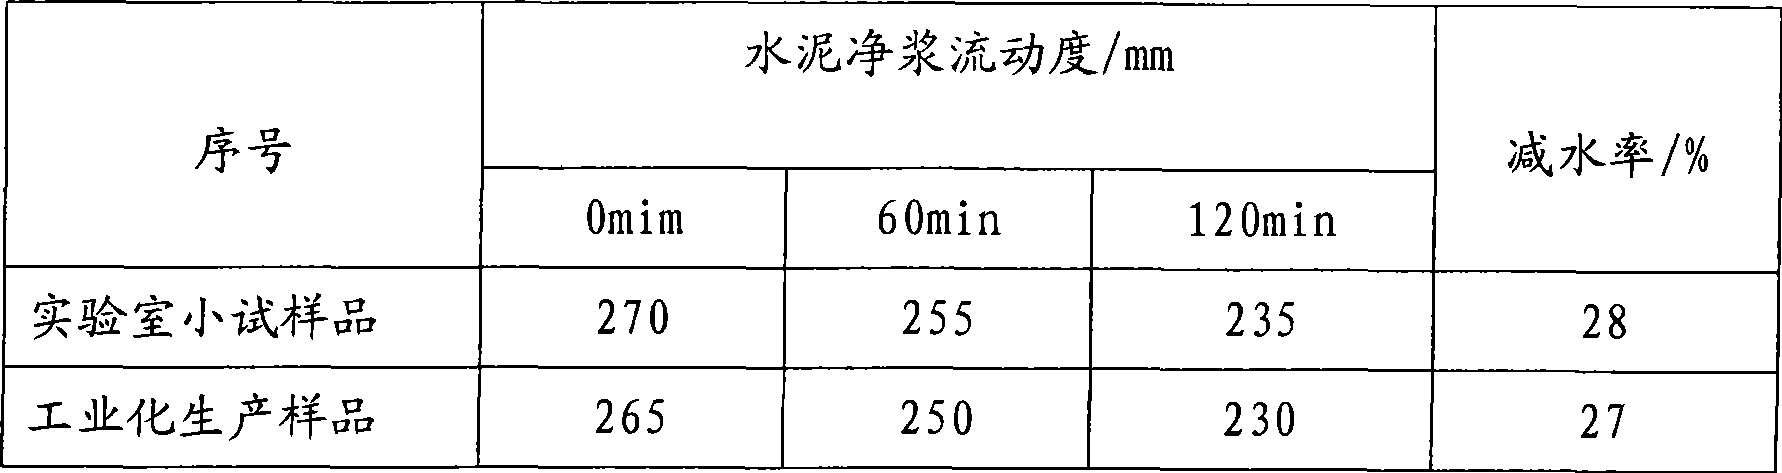 Preparation method of polycarboxylic acids high efficiency water reducer